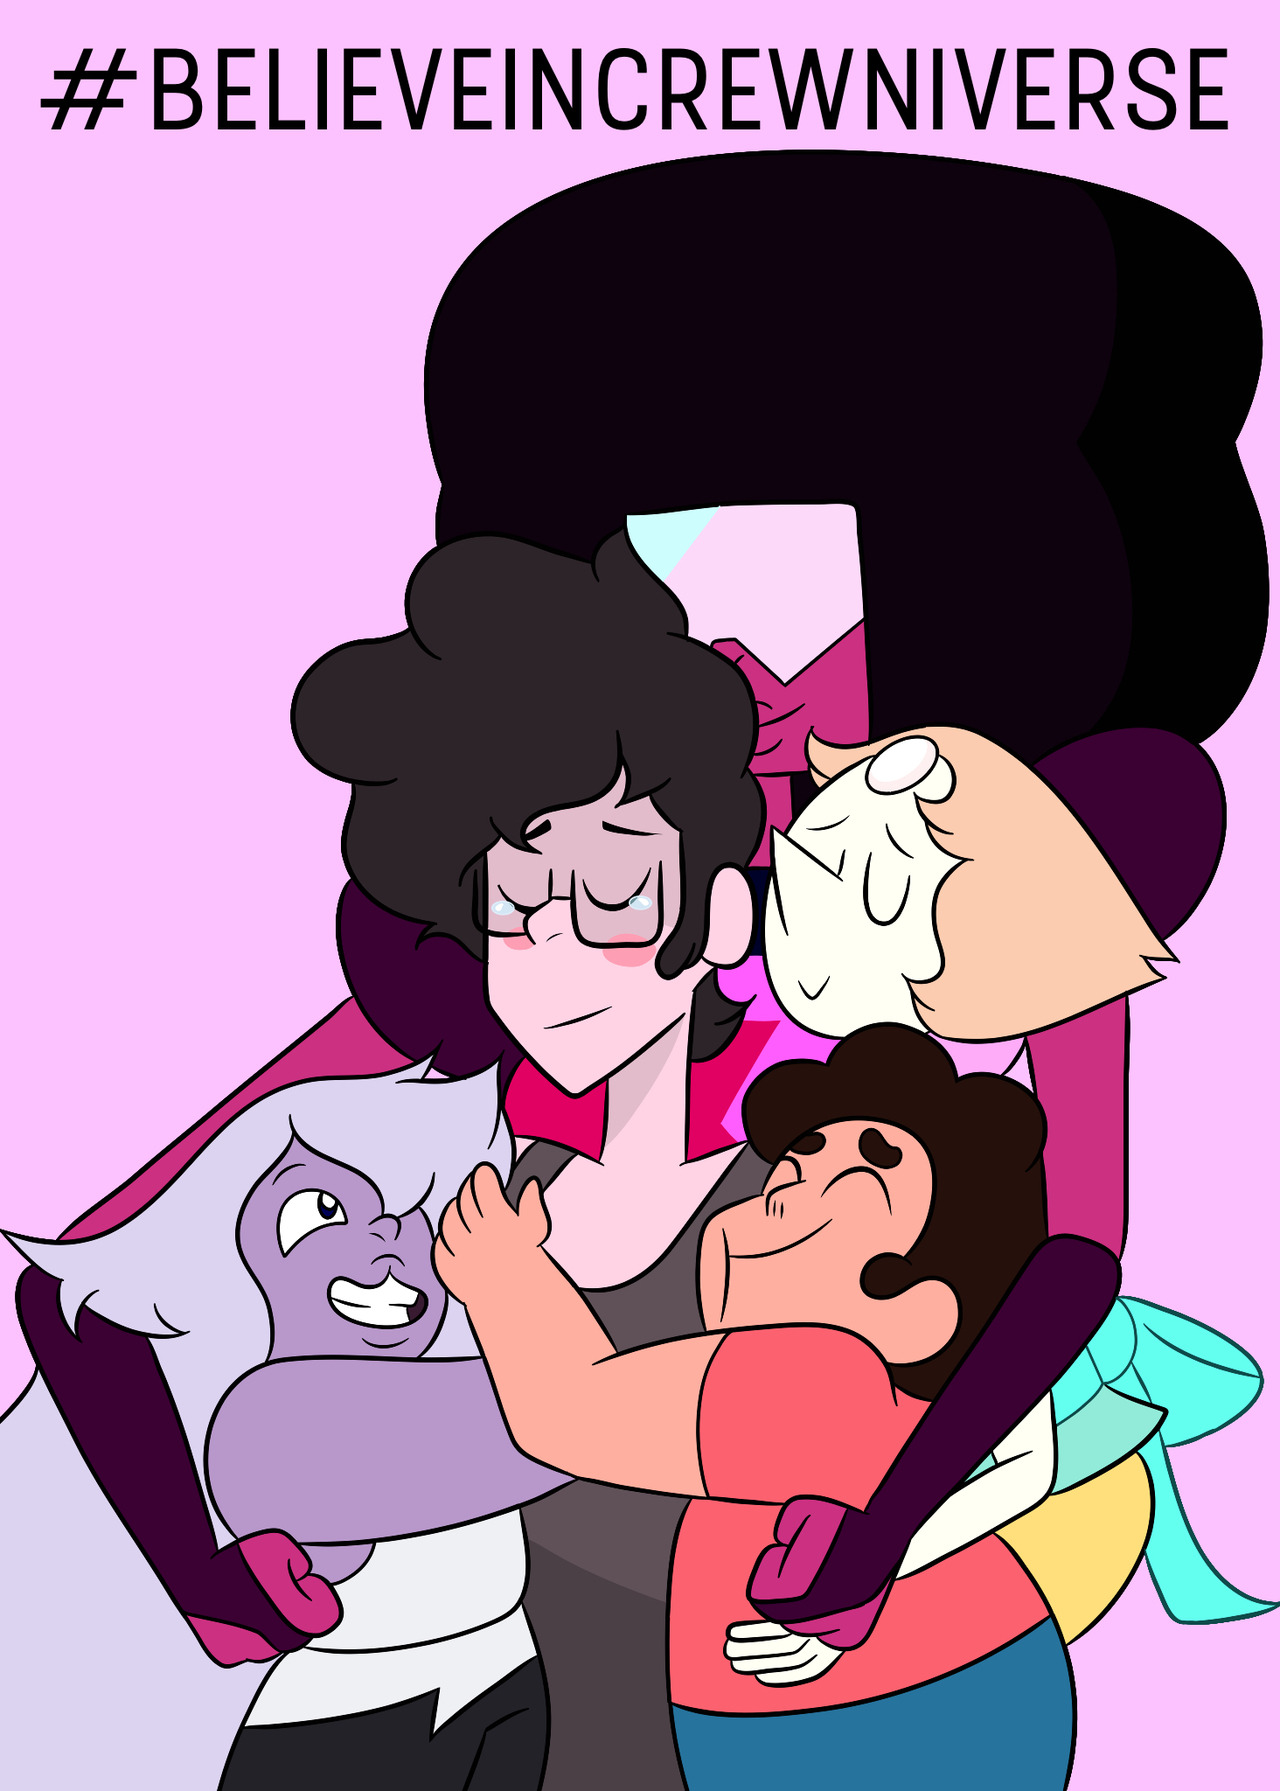 For the #BelieveInCrewniverse campaign! All I want to do is just give @rebeccasugar a big hug. None of the crew deserve to deal with how unprofessional CN is. I hope we can look past all this one day.